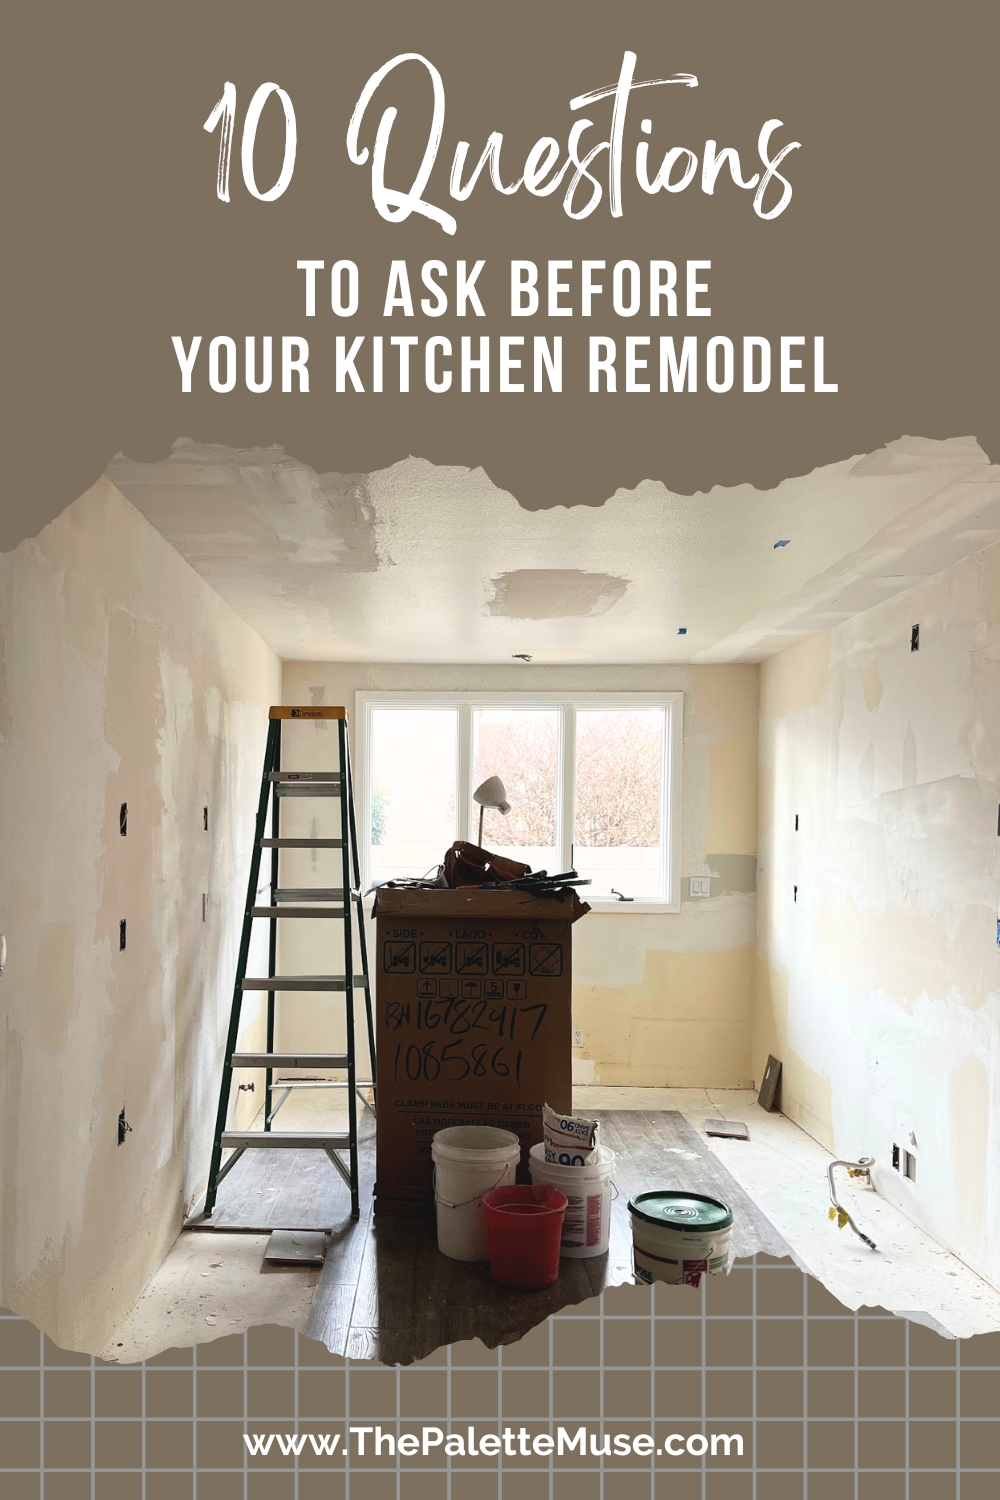 10 Questions to ask before your kitchen remodel